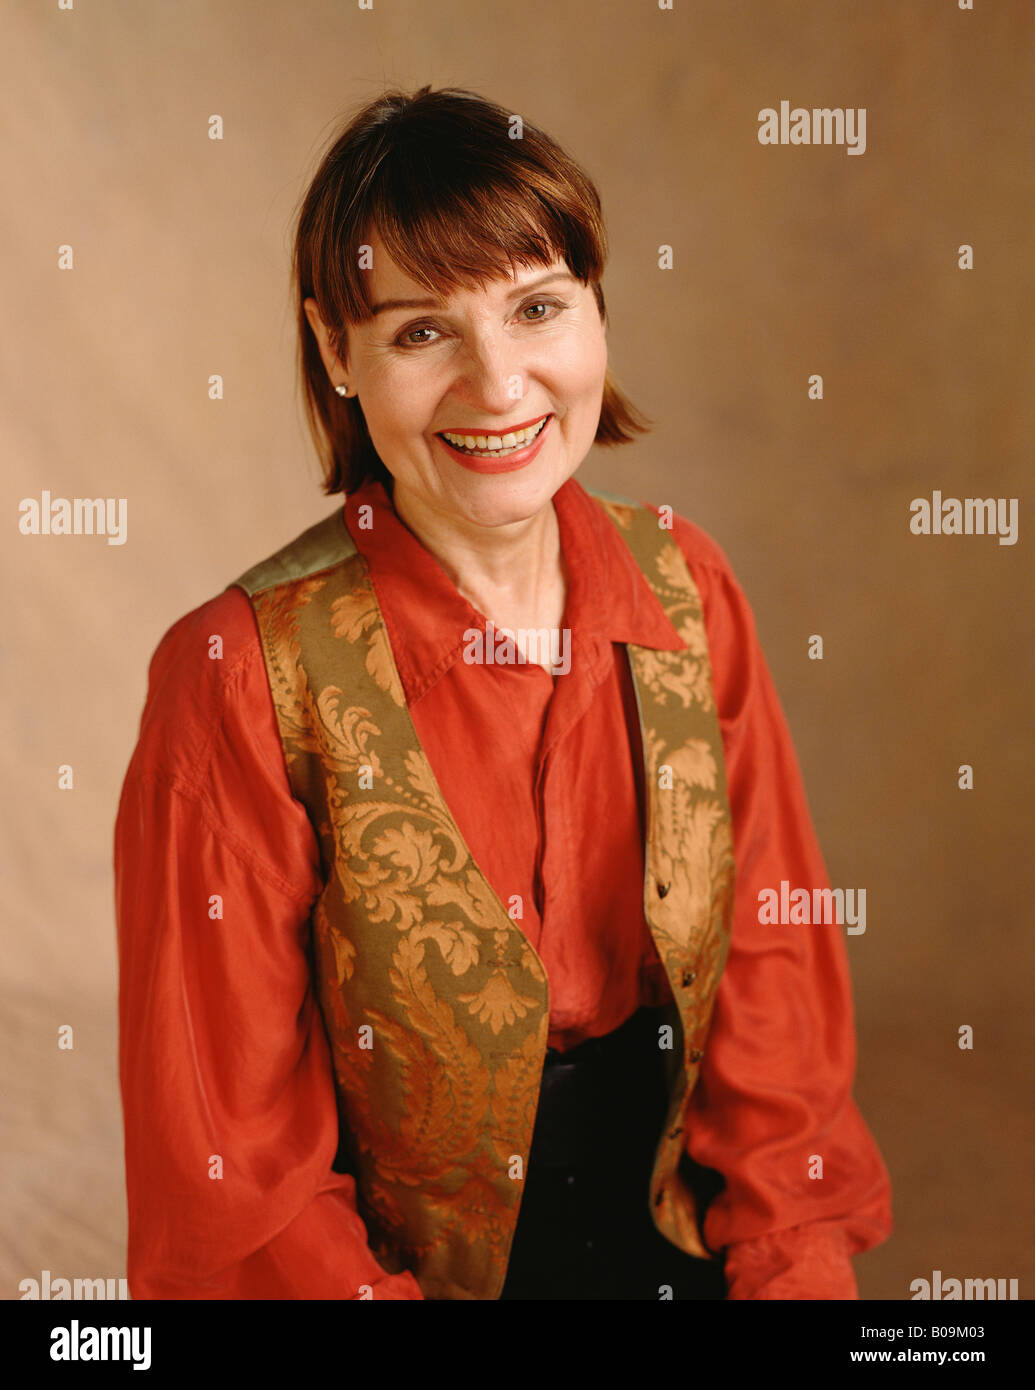 A studio portrait of a woman in her forties smiling Stock Photo